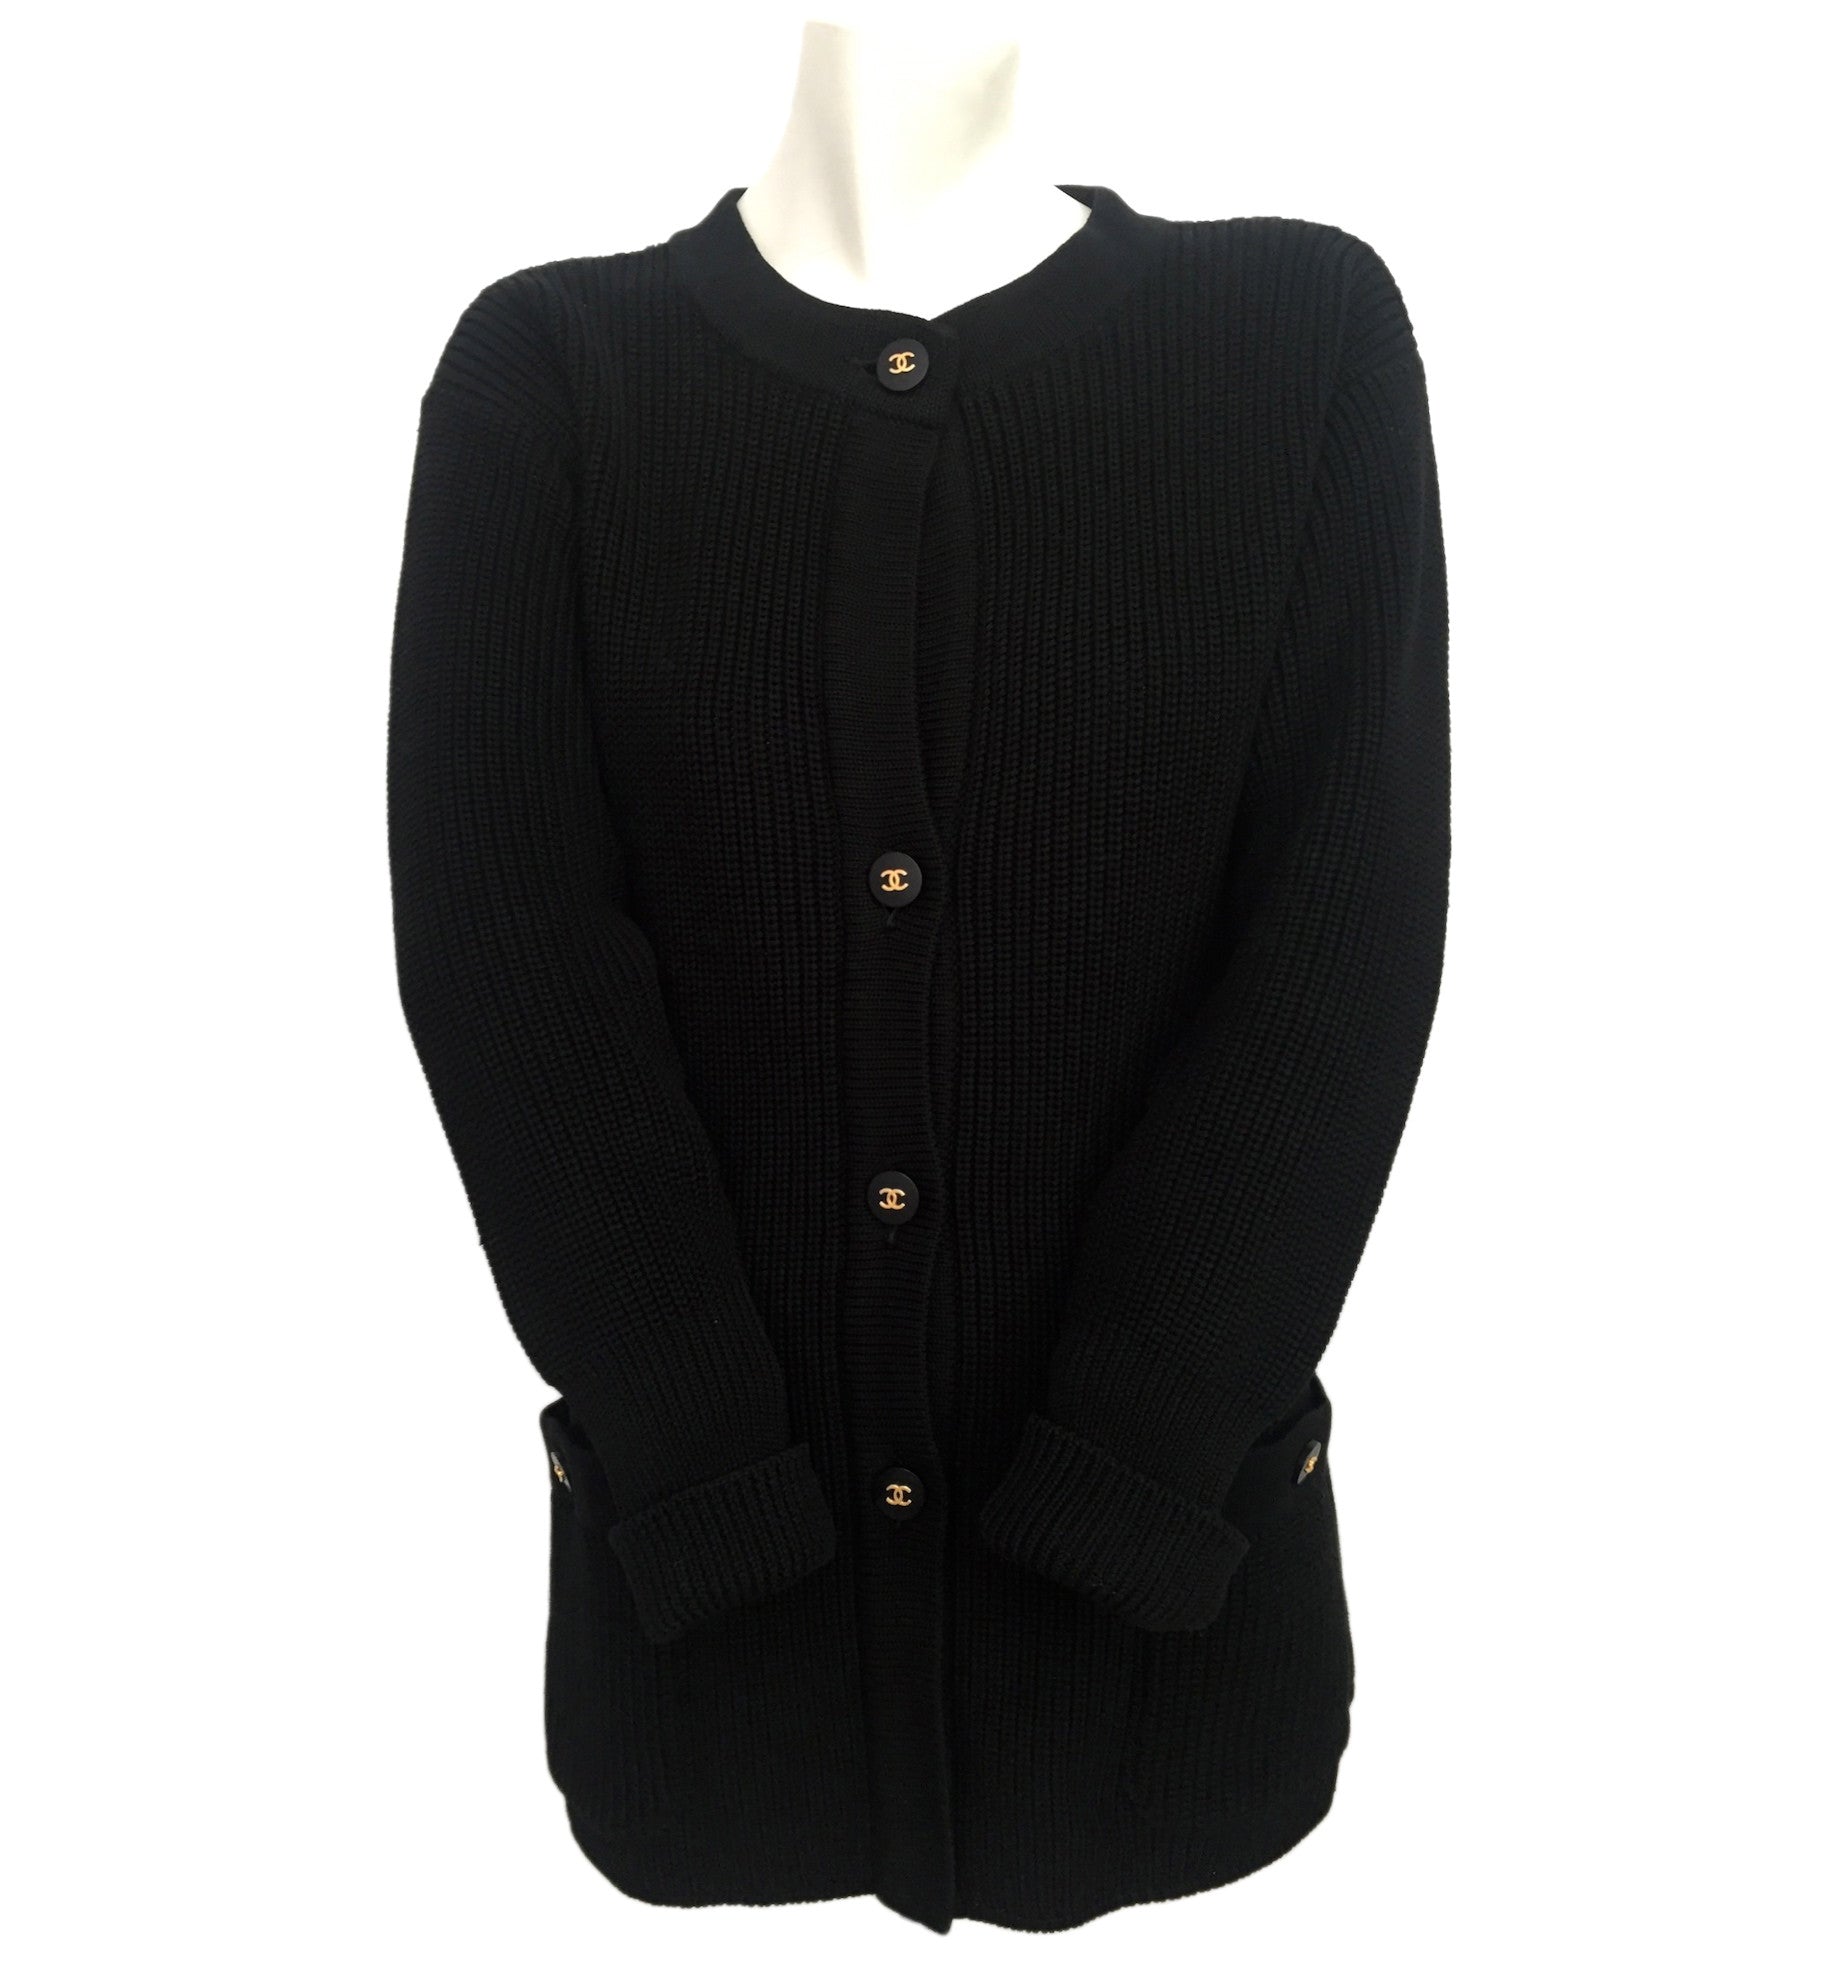 Authentic Chanel Classic Black Wool Blend Cardigan Sweater Jacket Size ...